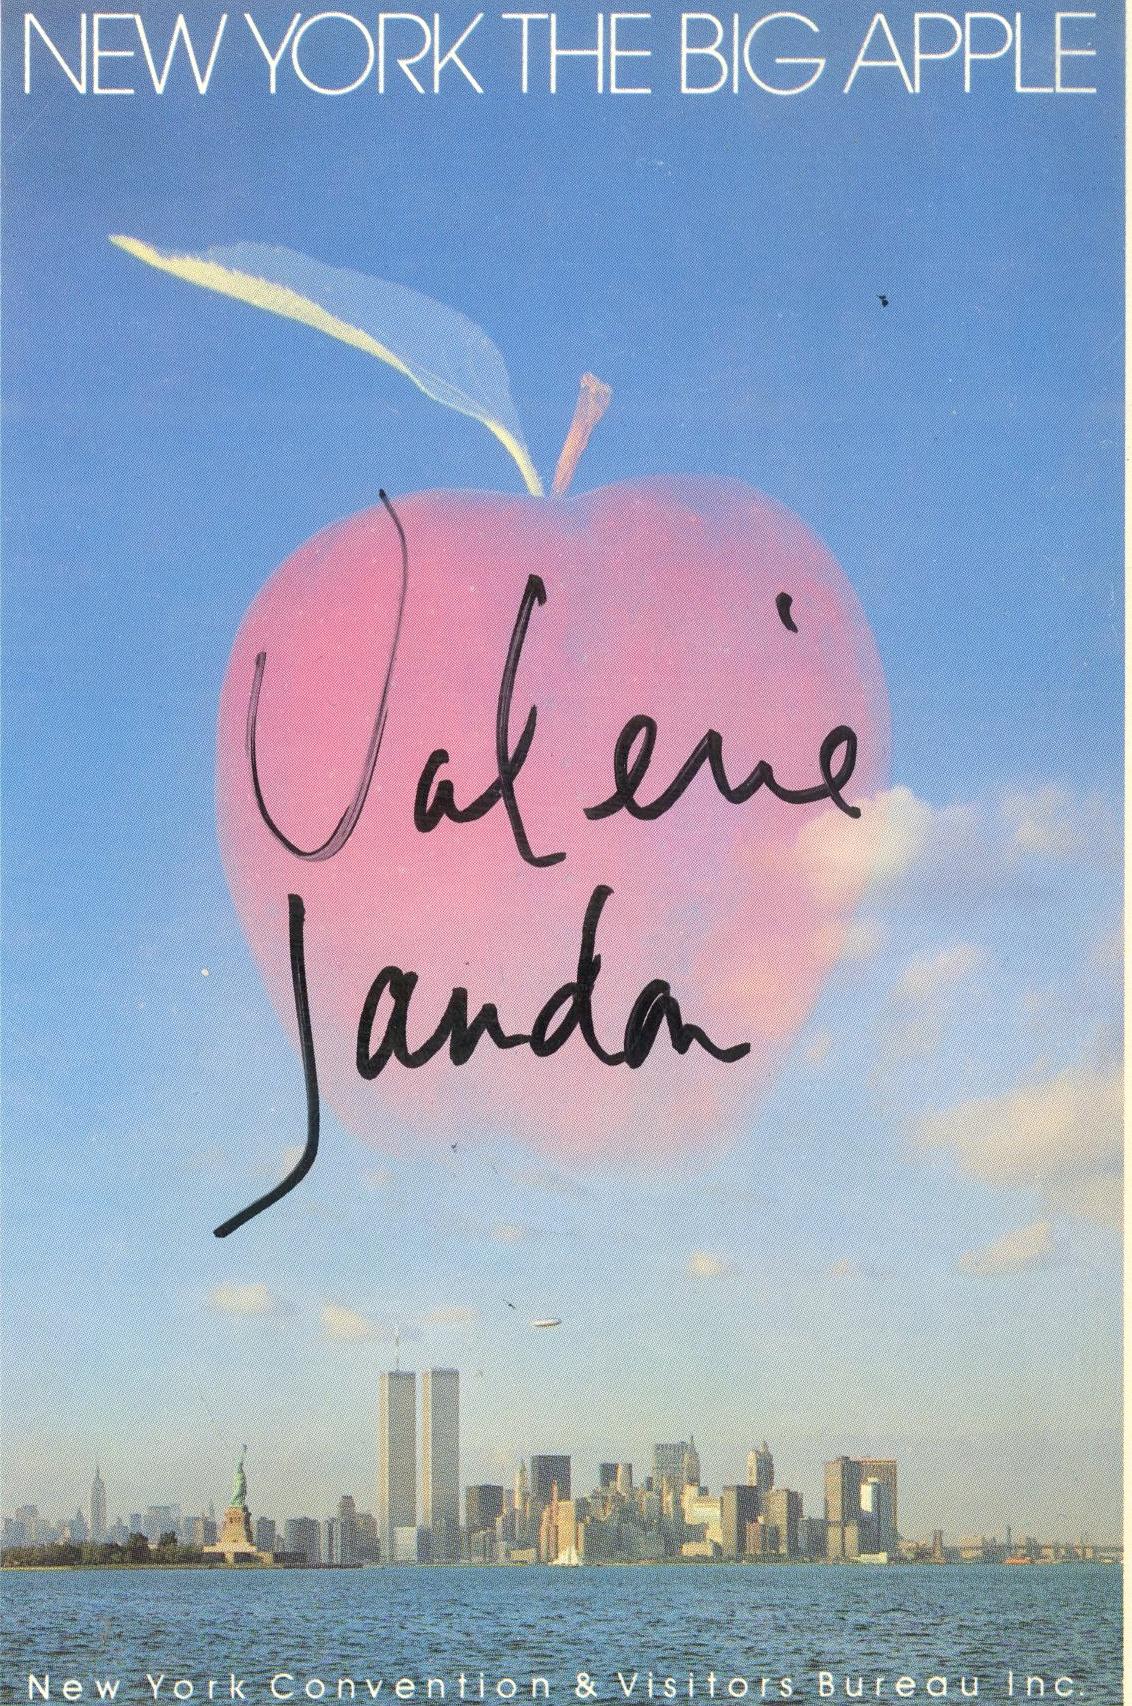 New York The Big Apple with Twin Towers (postcard hand signed by Valerie Jaudon)